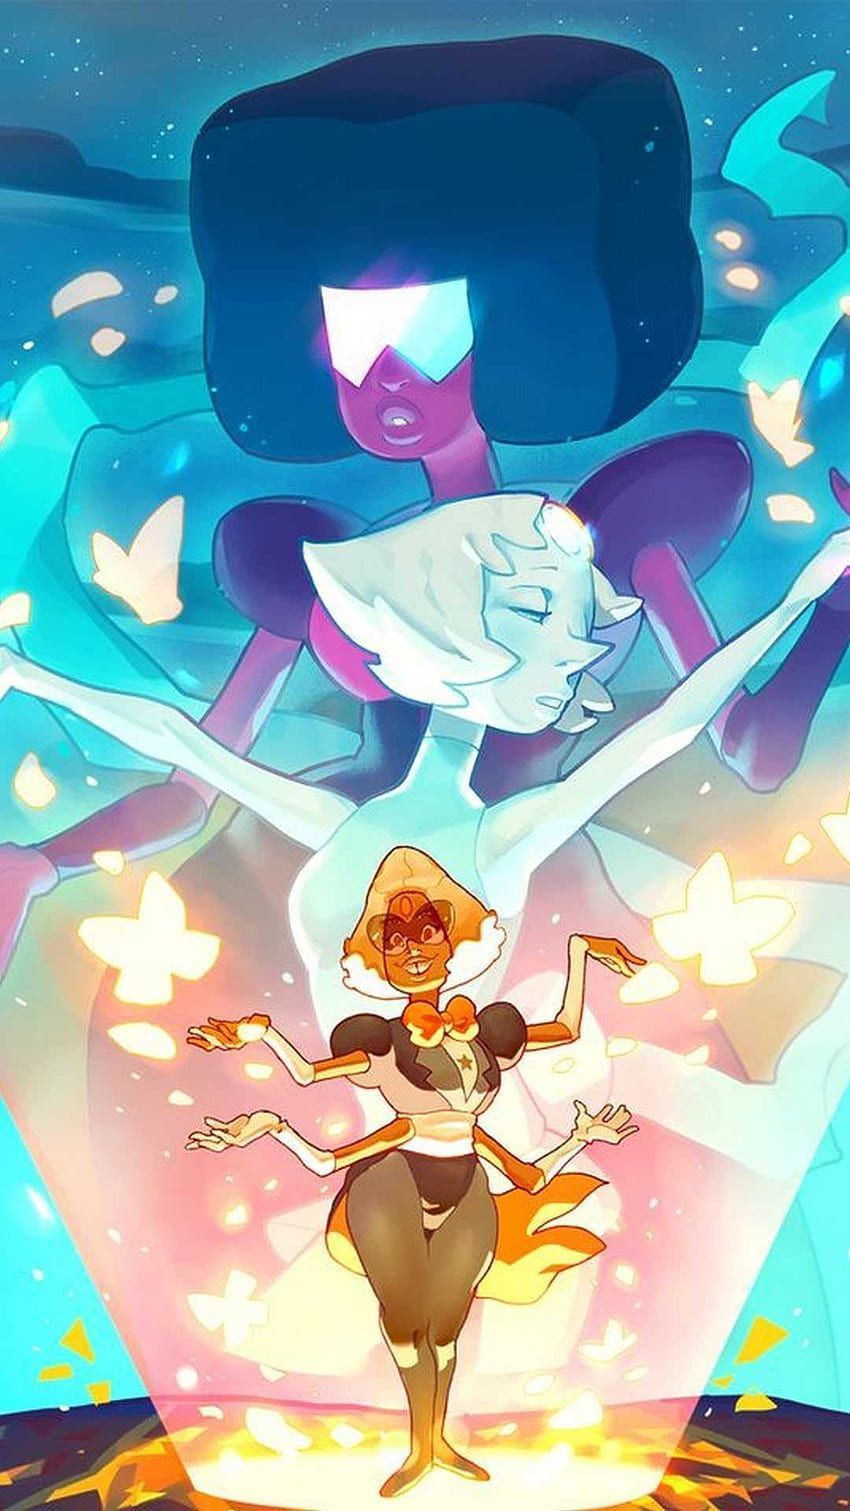 Steven Universe iPhone Wallpaper with high-resolution 1080x1920 pixel. You can use this wallpaper for your iPhone 5, 6, 7, 8, X, XS, XR backgrounds, Mobile Screensaver, or iPad Lock Screen - Steven Universe